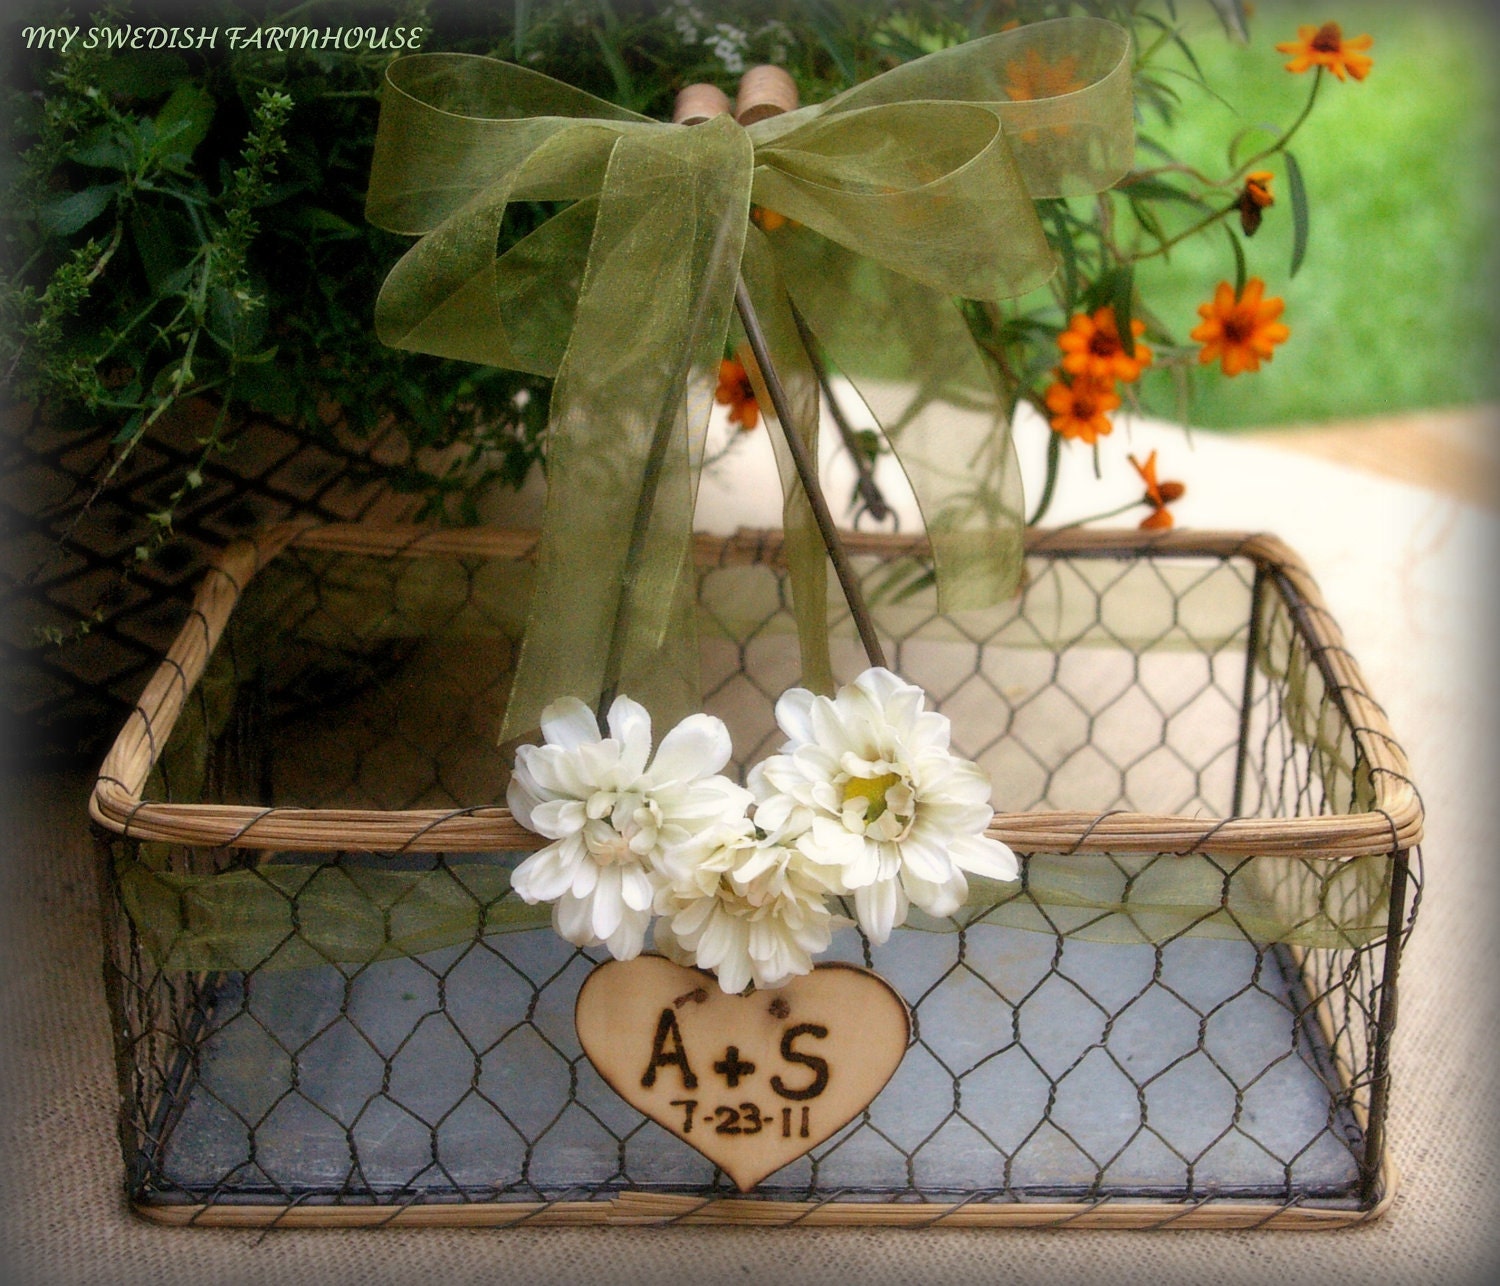 LG Chicken Wire Card Basket Box Table Centerpiece Rustic Barn Wedding Personalized Engraved Heart (Your Color Choice of Ribbon and Flower)